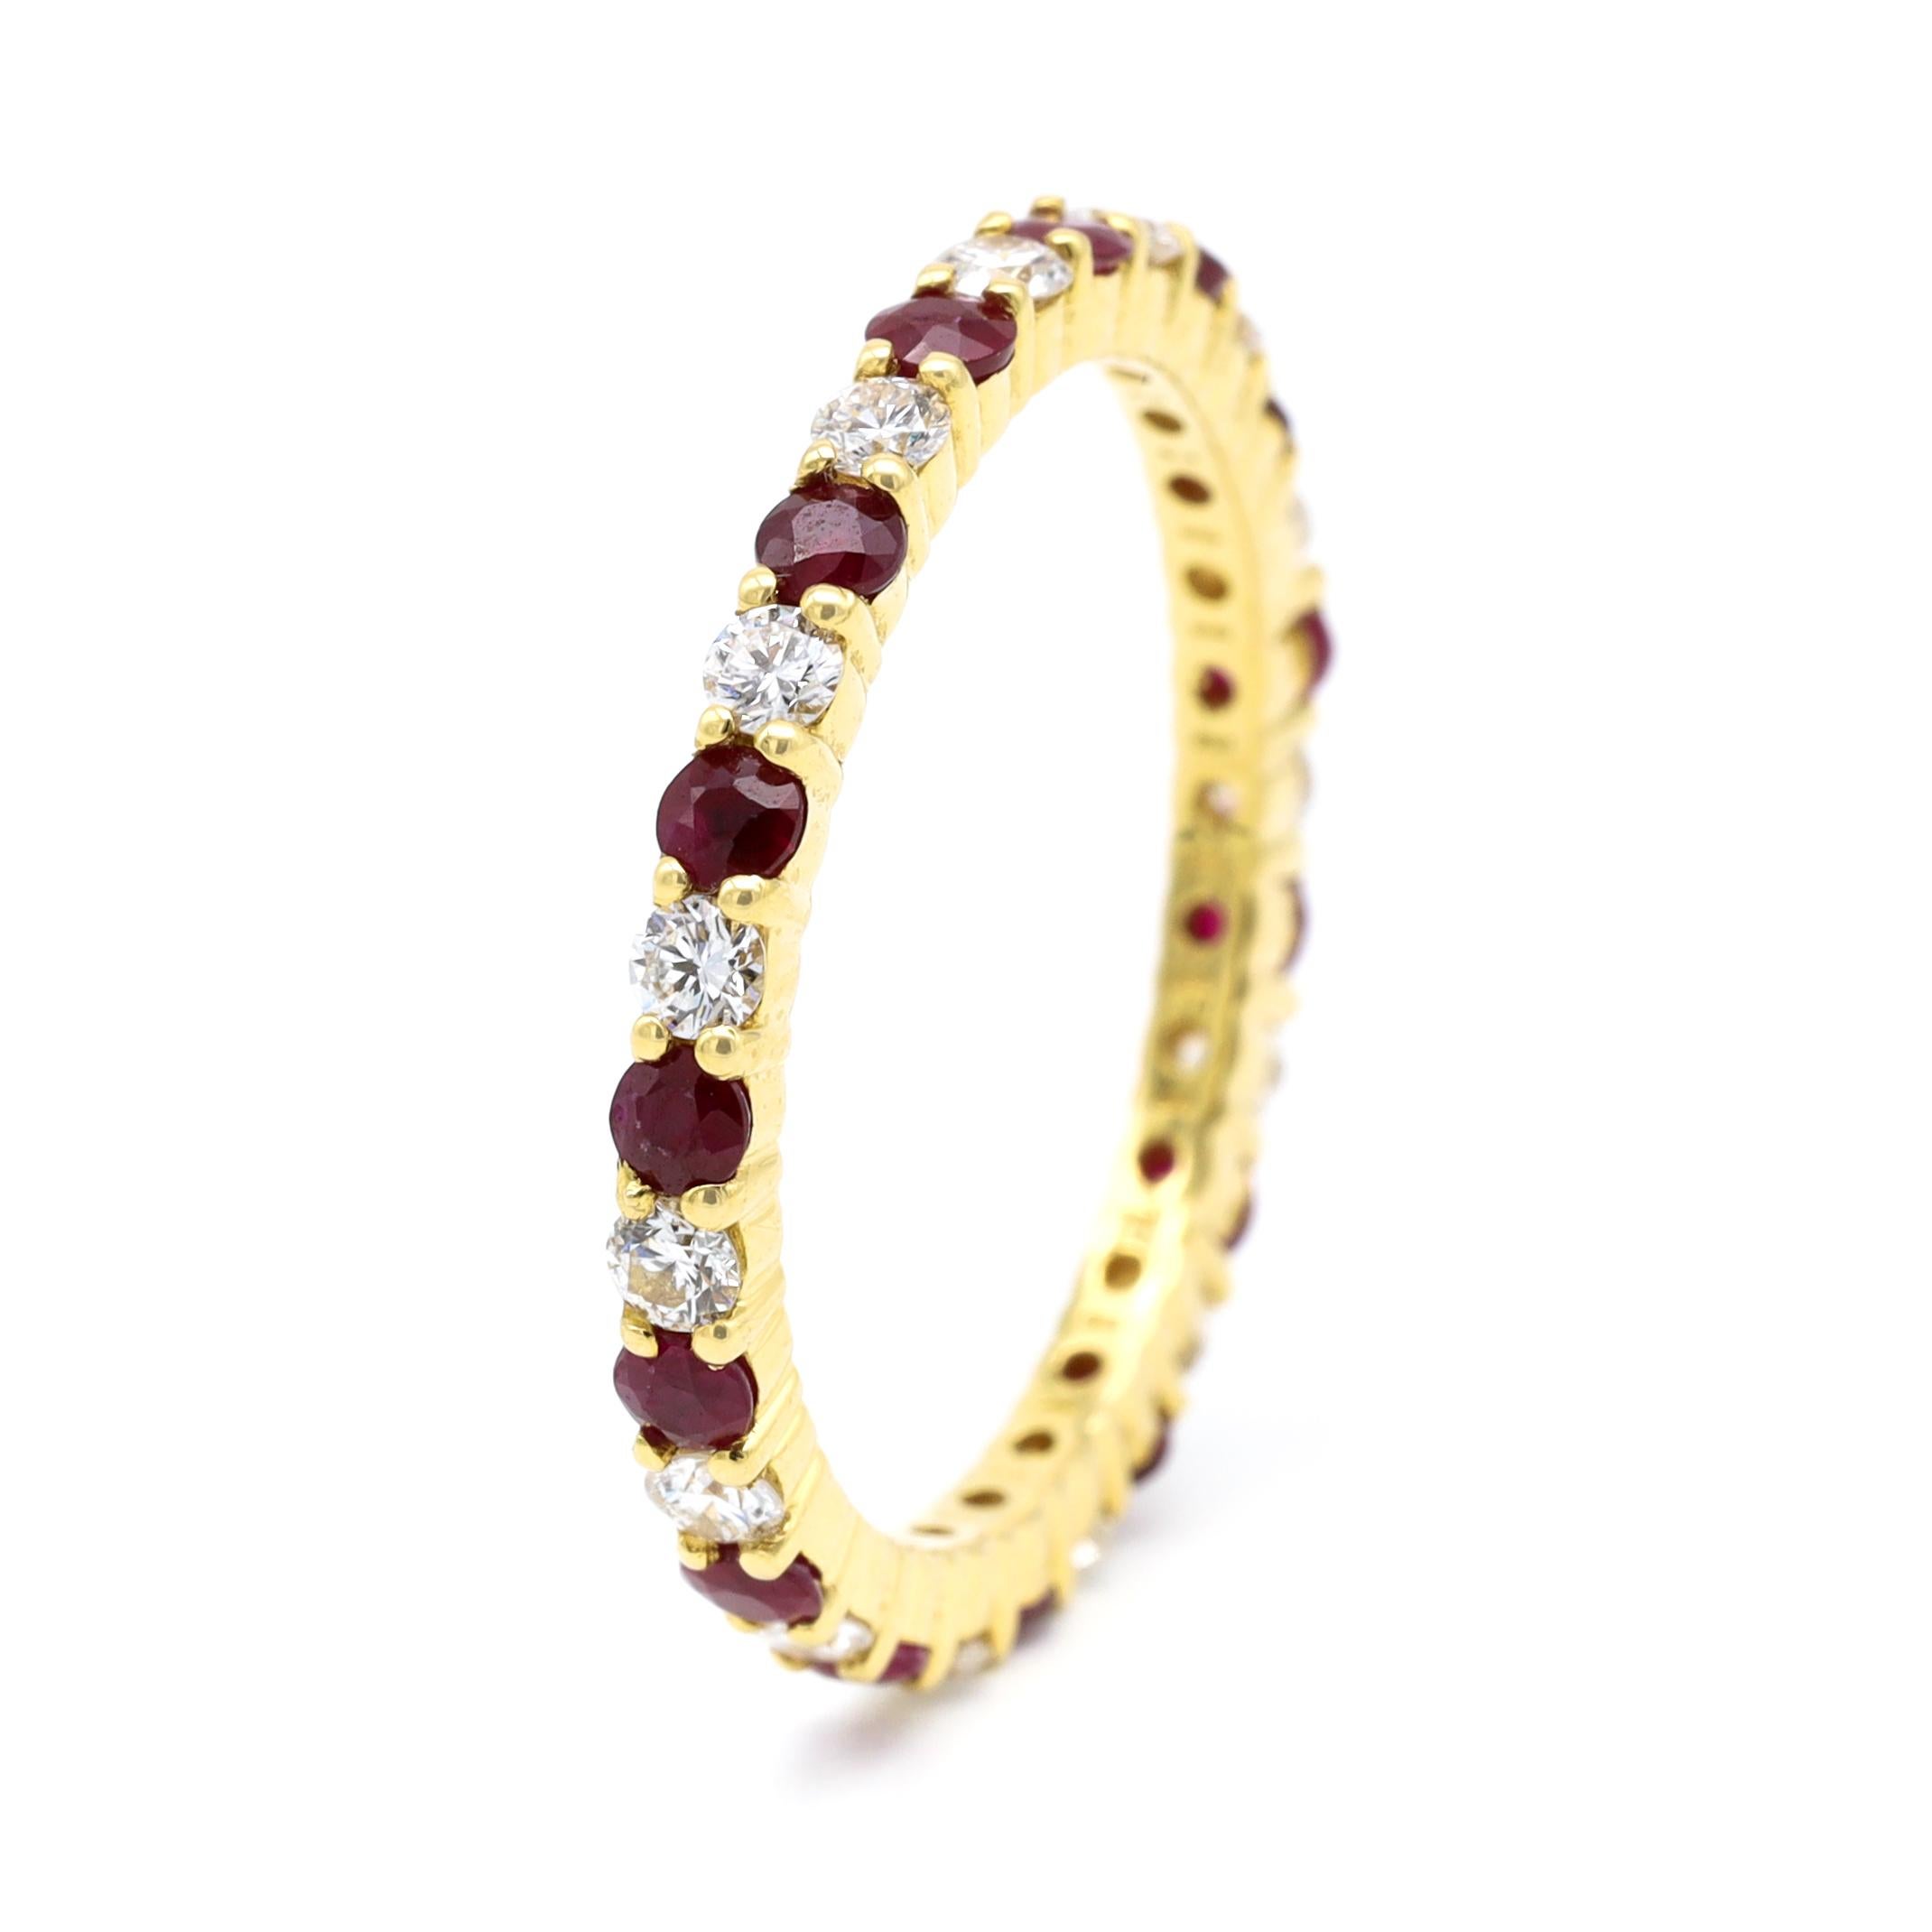 18 Karat Yellow Gold Ruby and Diamond Brilliant Cut Eternity Full Band Ring

This elegant dark red ruby and diamond round full band is radiating. The alternating round diamonds and rubies held by the common yellow gold prongs in the cluster setting